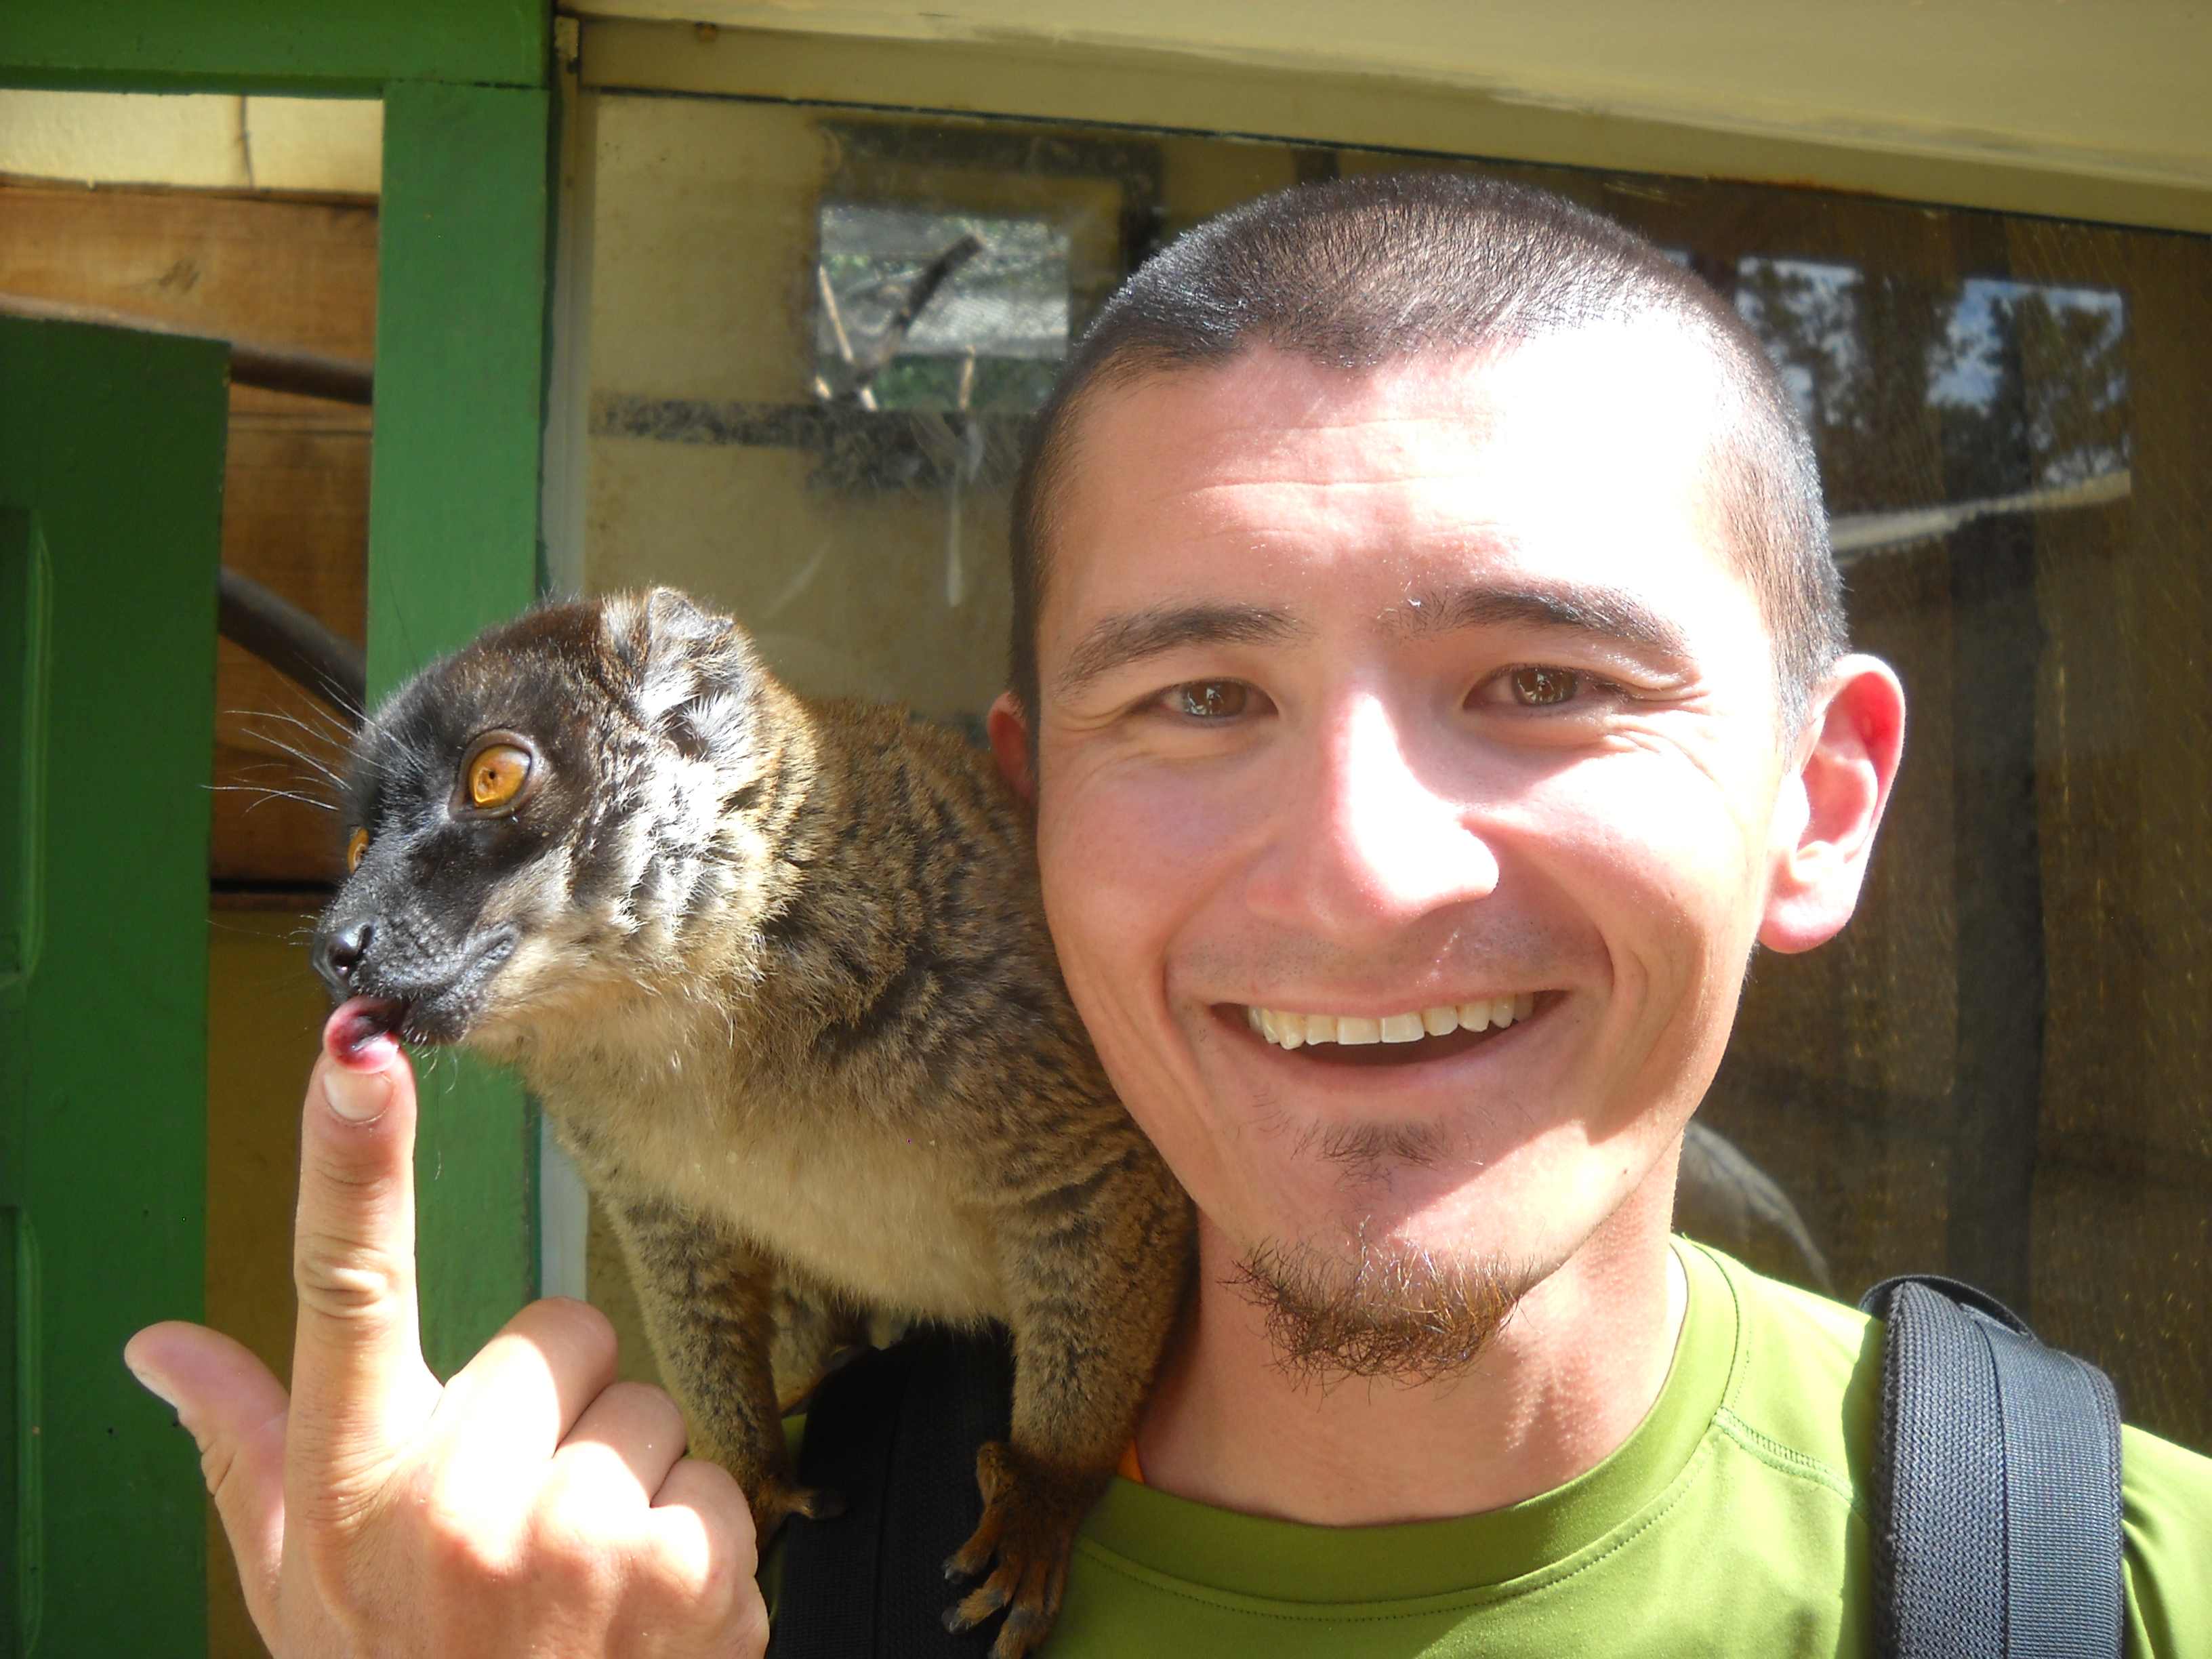 Hanging with a common brown lemur (Eulemur fulvus) during a behind the scenes tour of the lemur enclosures at the Zoo de Tsimbazaza (Antananarivo, Madagascar) in 2012.